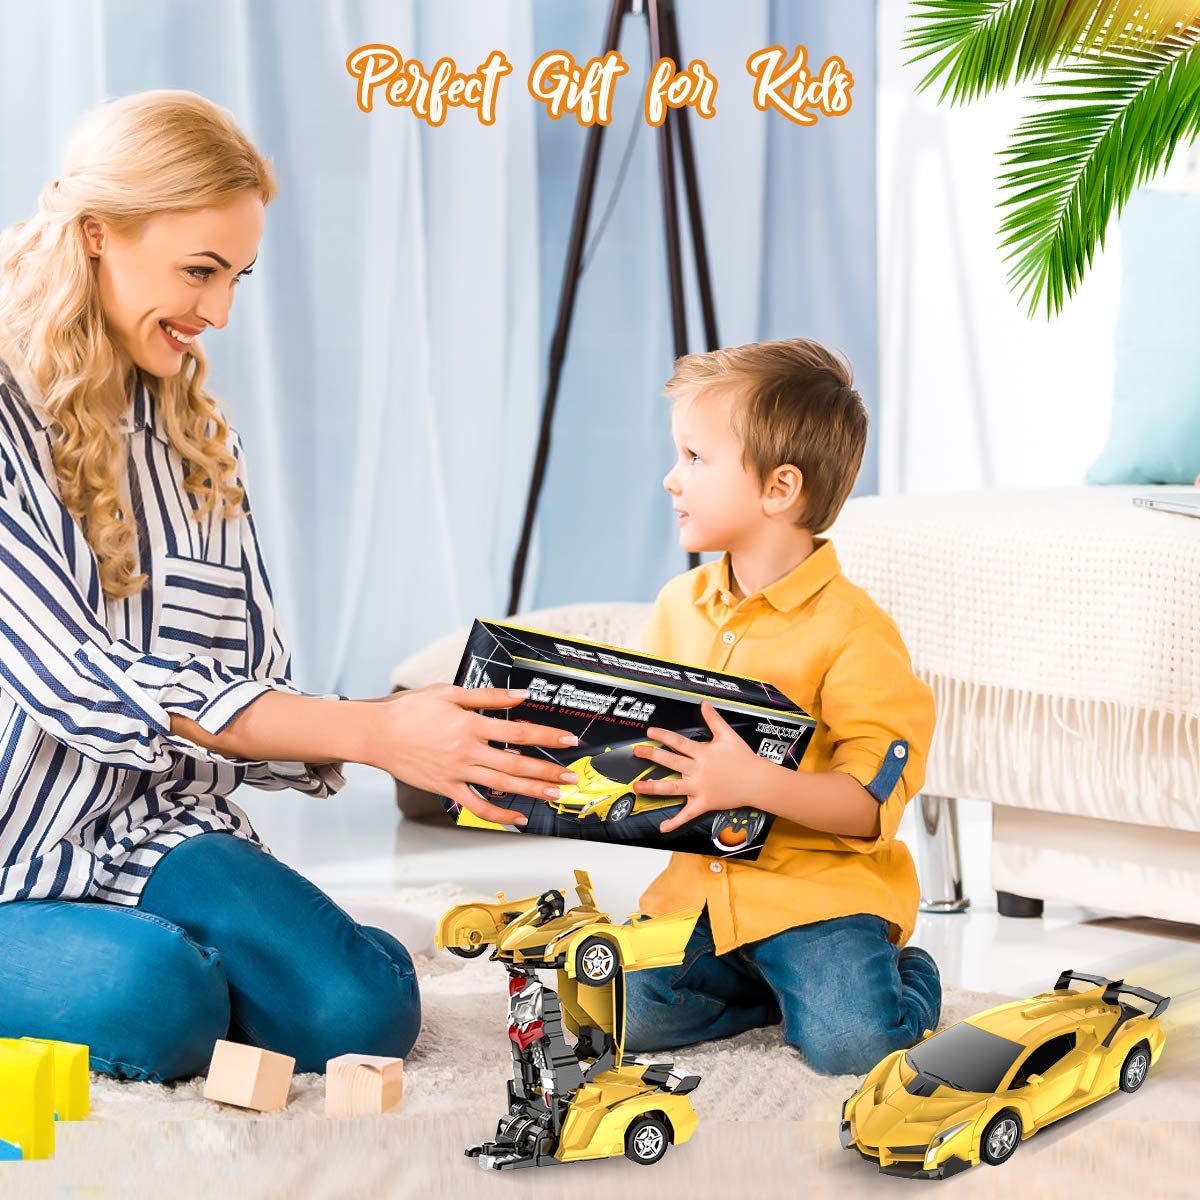 Remote Control Car Transforming Robot RC Car for Kids, 2.4GHz 1:18 Scale Transform Car Vehicle with One Button Deformation & 360°Rotating Drifting, R